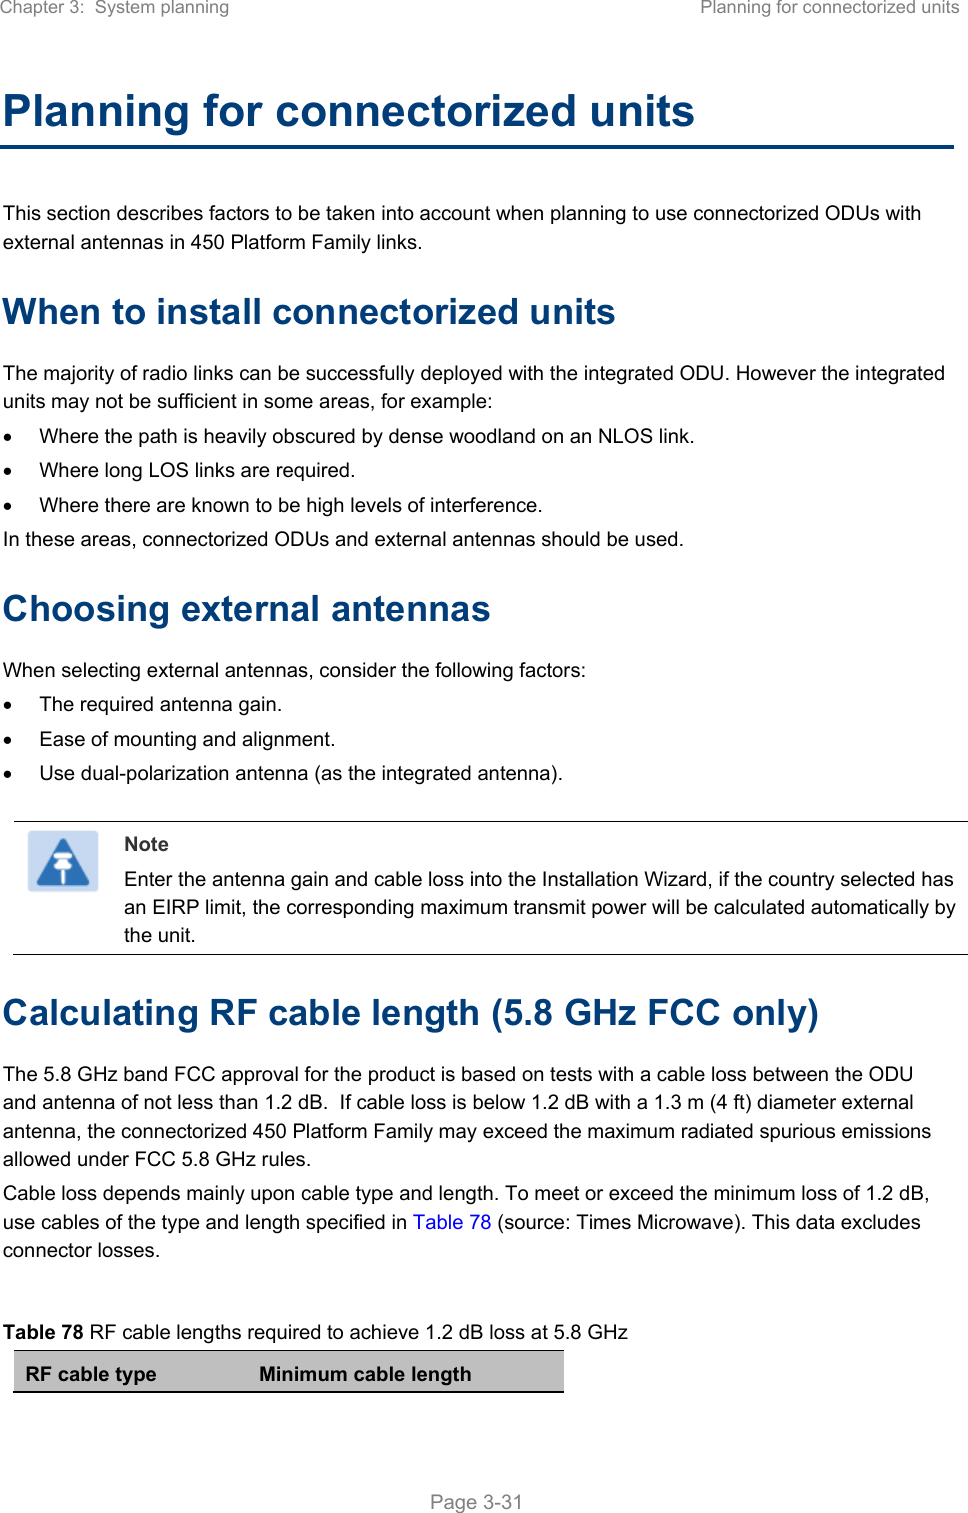 Chapter 3:  System planning  Planning for connectorized units   Page 3-31 Planning for connectorized units This section describes factors to be taken into account when planning to use connectorized ODUs with external antennas in 450 Platform Family links. When to install connectorized units The majority of radio links can be successfully deployed with the integrated ODU. However the integrated units may not be sufficient in some areas, for example:   Where the path is heavily obscured by dense woodland on an NLOS link.   Where long LOS links are required.    Where there are known to be high levels of interference. In these areas, connectorized ODUs and external antennas should be used. Choosing external antennas When selecting external antennas, consider the following factors:   The required antenna gain.   Ease of mounting and alignment.   Use dual-polarization antenna (as the integrated antenna).   Note Enter the antenna gain and cable loss into the Installation Wizard, if the country selected has an EIRP limit, the corresponding maximum transmit power will be calculated automatically by the unit. Calculating RF cable length (5.8 GHz FCC only) The 5.8 GHz band FCC approval for the product is based on tests with a cable loss between the ODU and antenna of not less than 1.2 dB.  If cable loss is below 1.2 dB with a 1.3 m (4 ft) diameter external antenna, the connectorized 450 Platform Family may exceed the maximum radiated spurious emissions allowed under FCC 5.8 GHz rules. Cable loss depends mainly upon cable type and length. To meet or exceed the minimum loss of 1.2 dB, use cables of the type and length specified in Table 78 (source: Times Microwave). This data excludes connector losses.  Table 78 RF cable lengths required to achieve 1.2 dB loss at 5.8 GHz RF cable type  Minimum cable length 